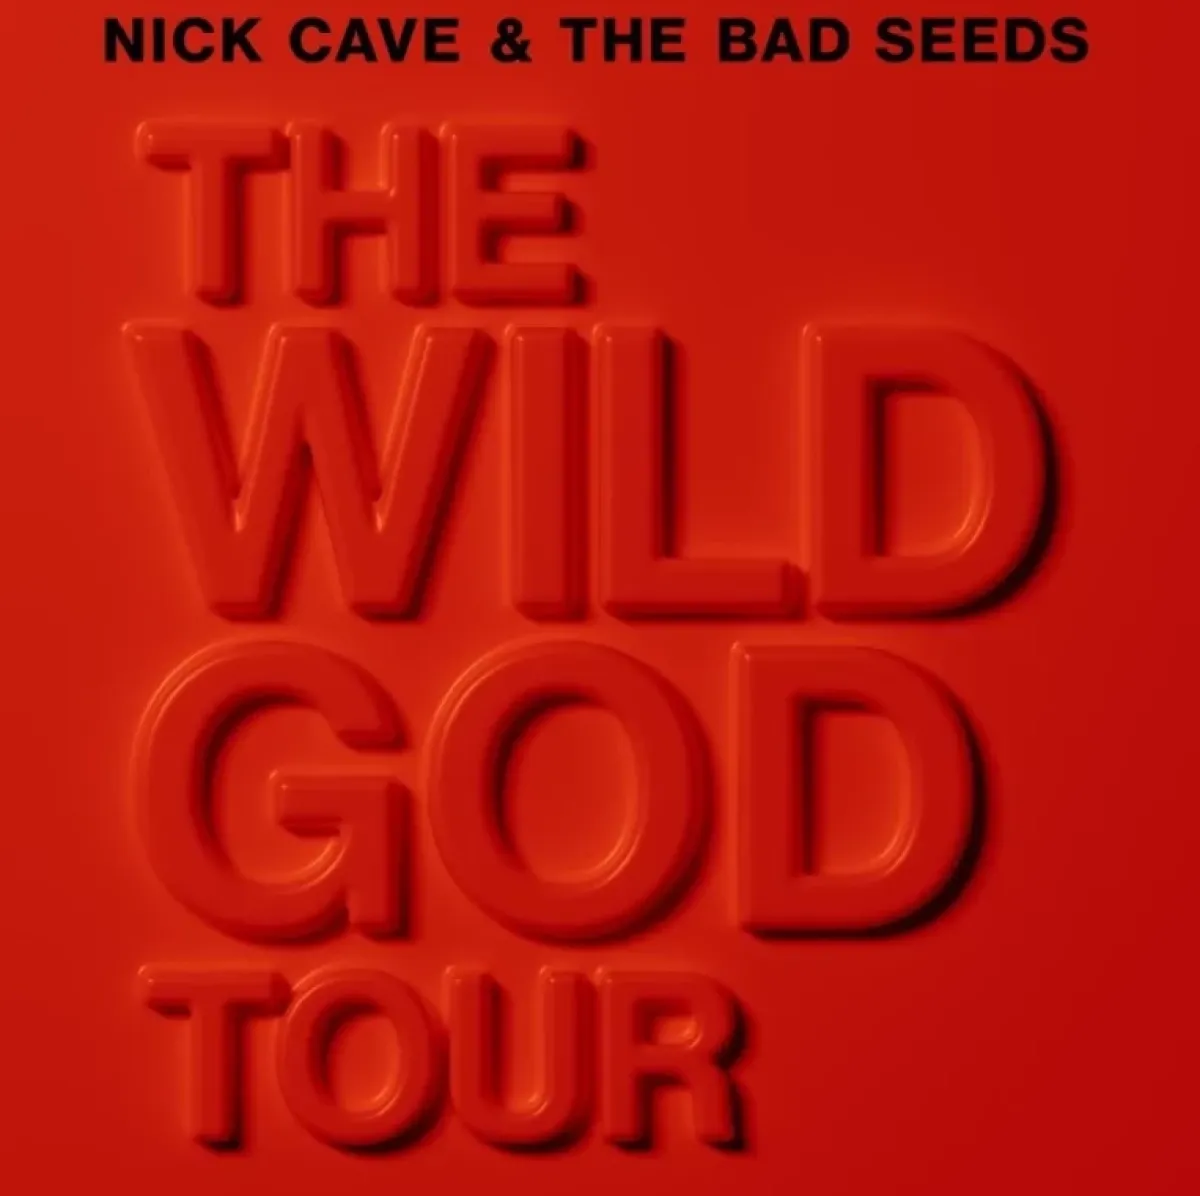 Nick Cave And The Bad Seeds at Ovo Hydro Tickets